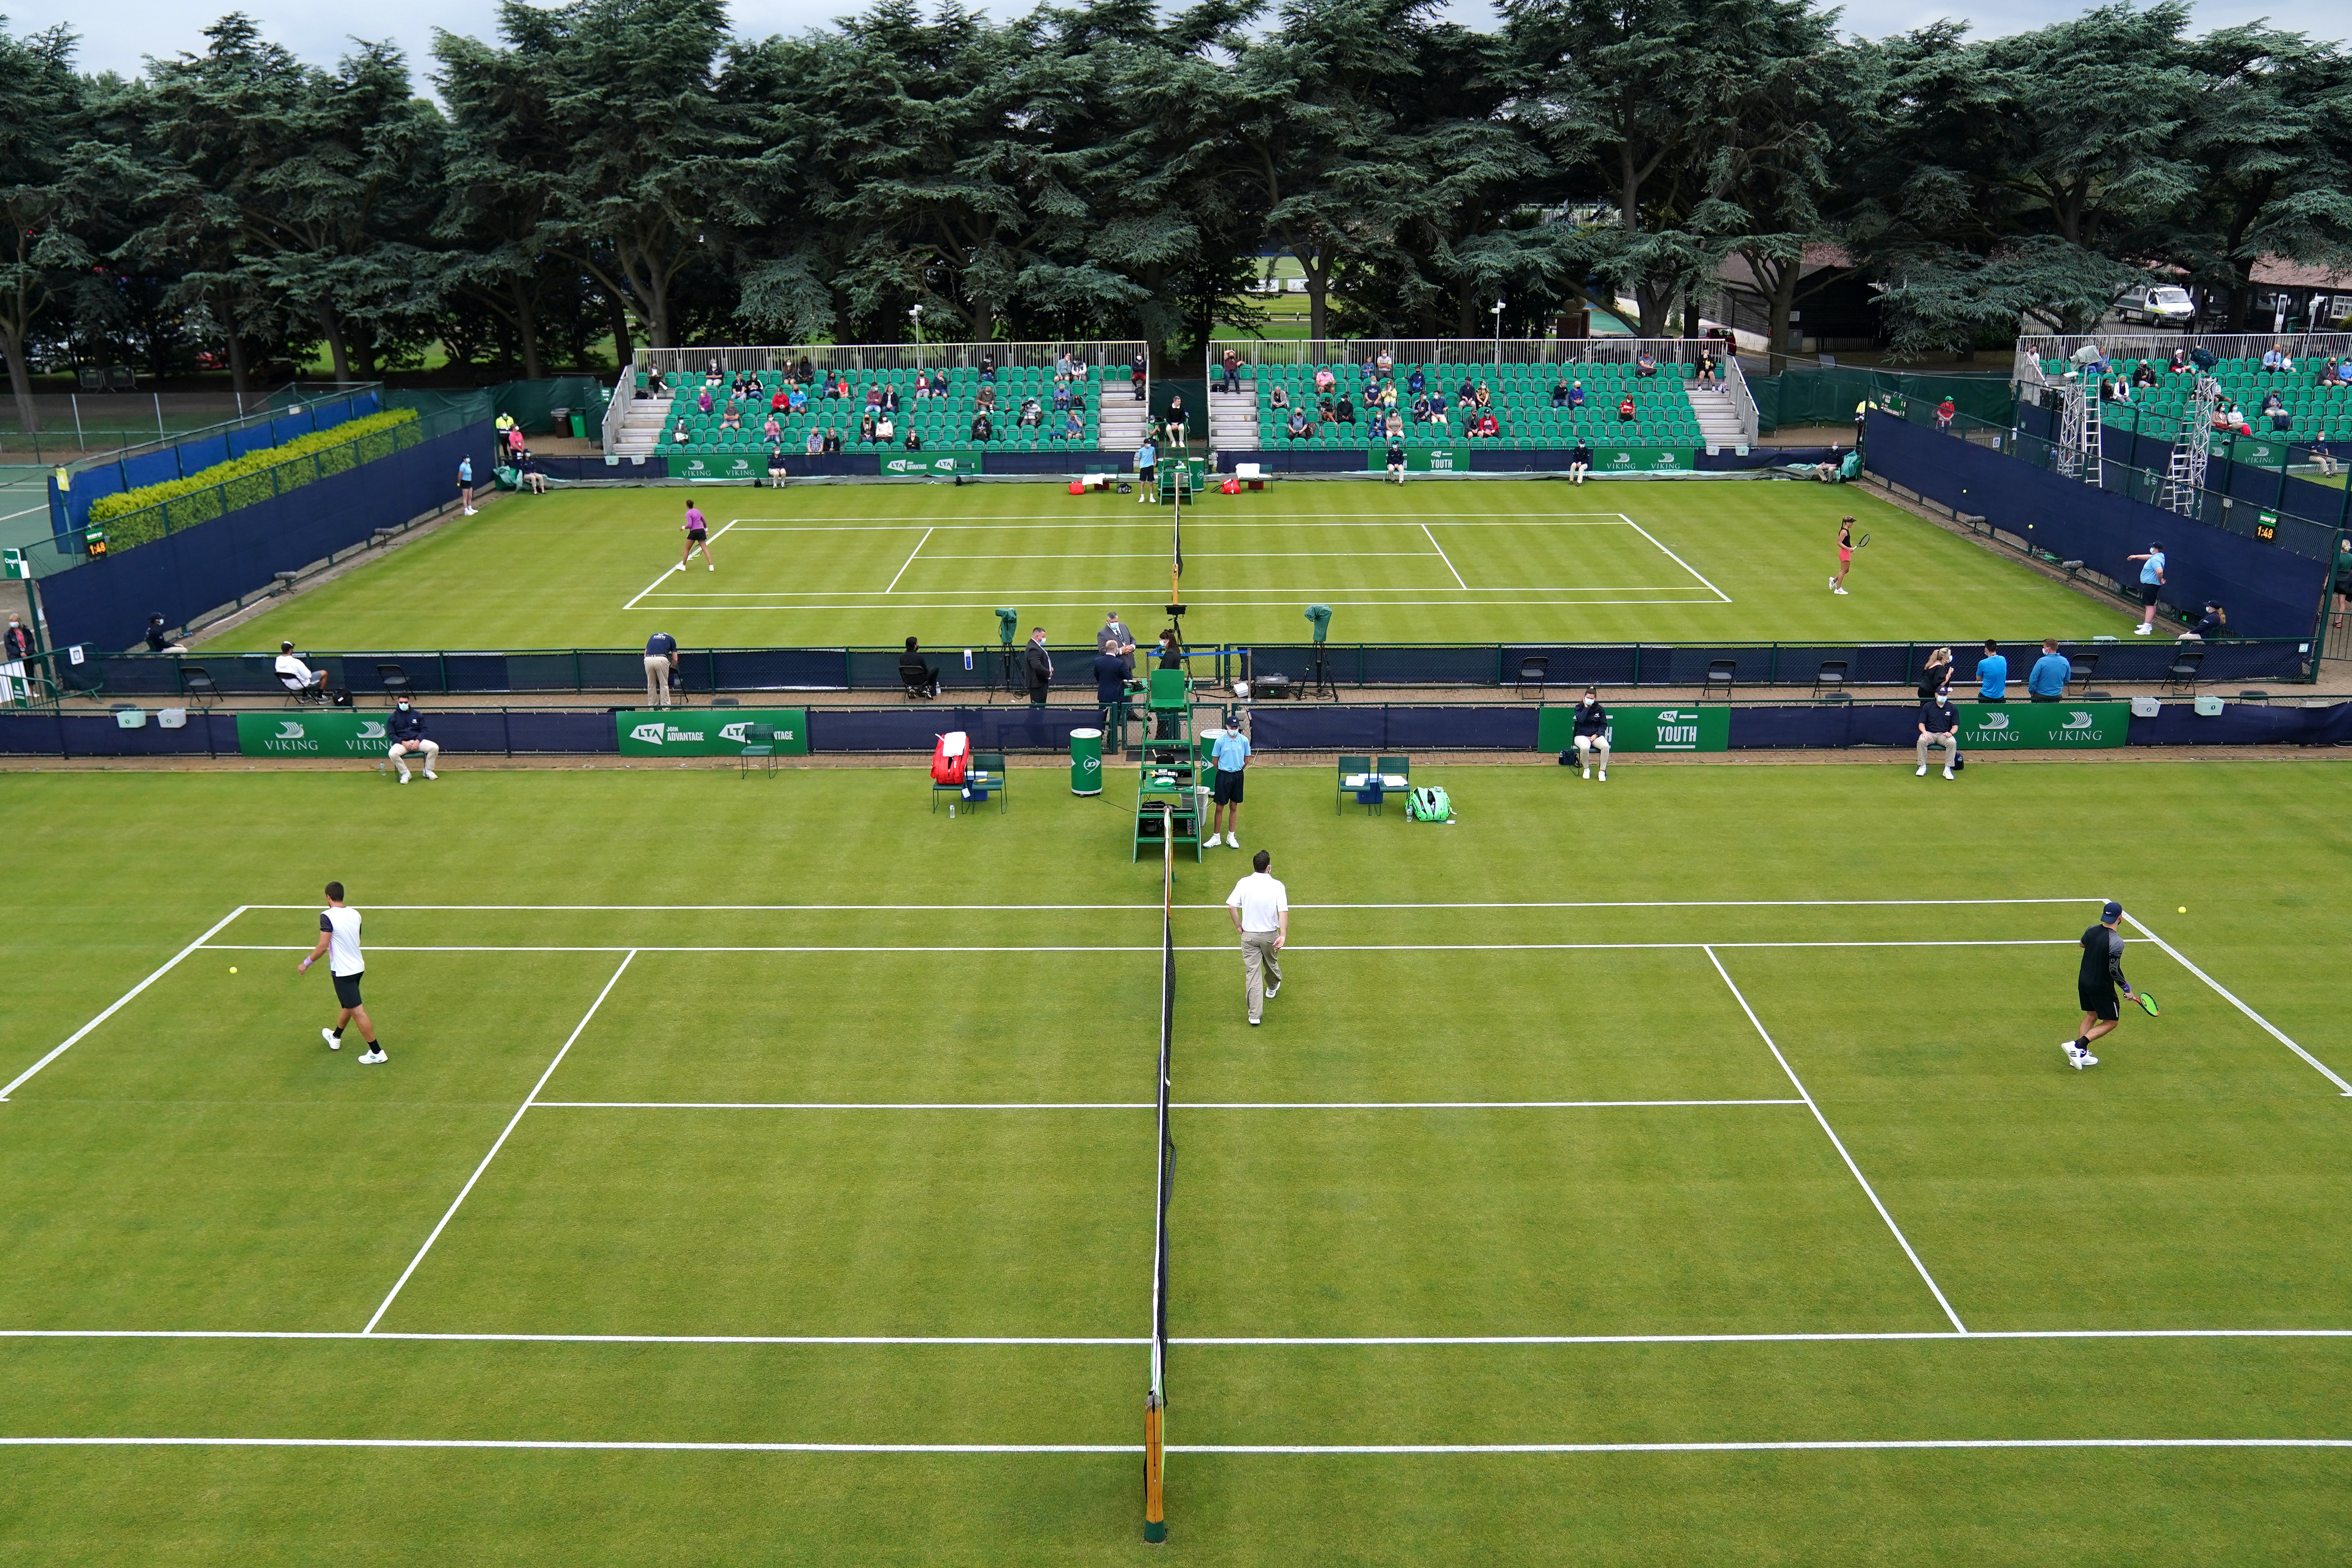 There will be more tennis events in Britain in 2022